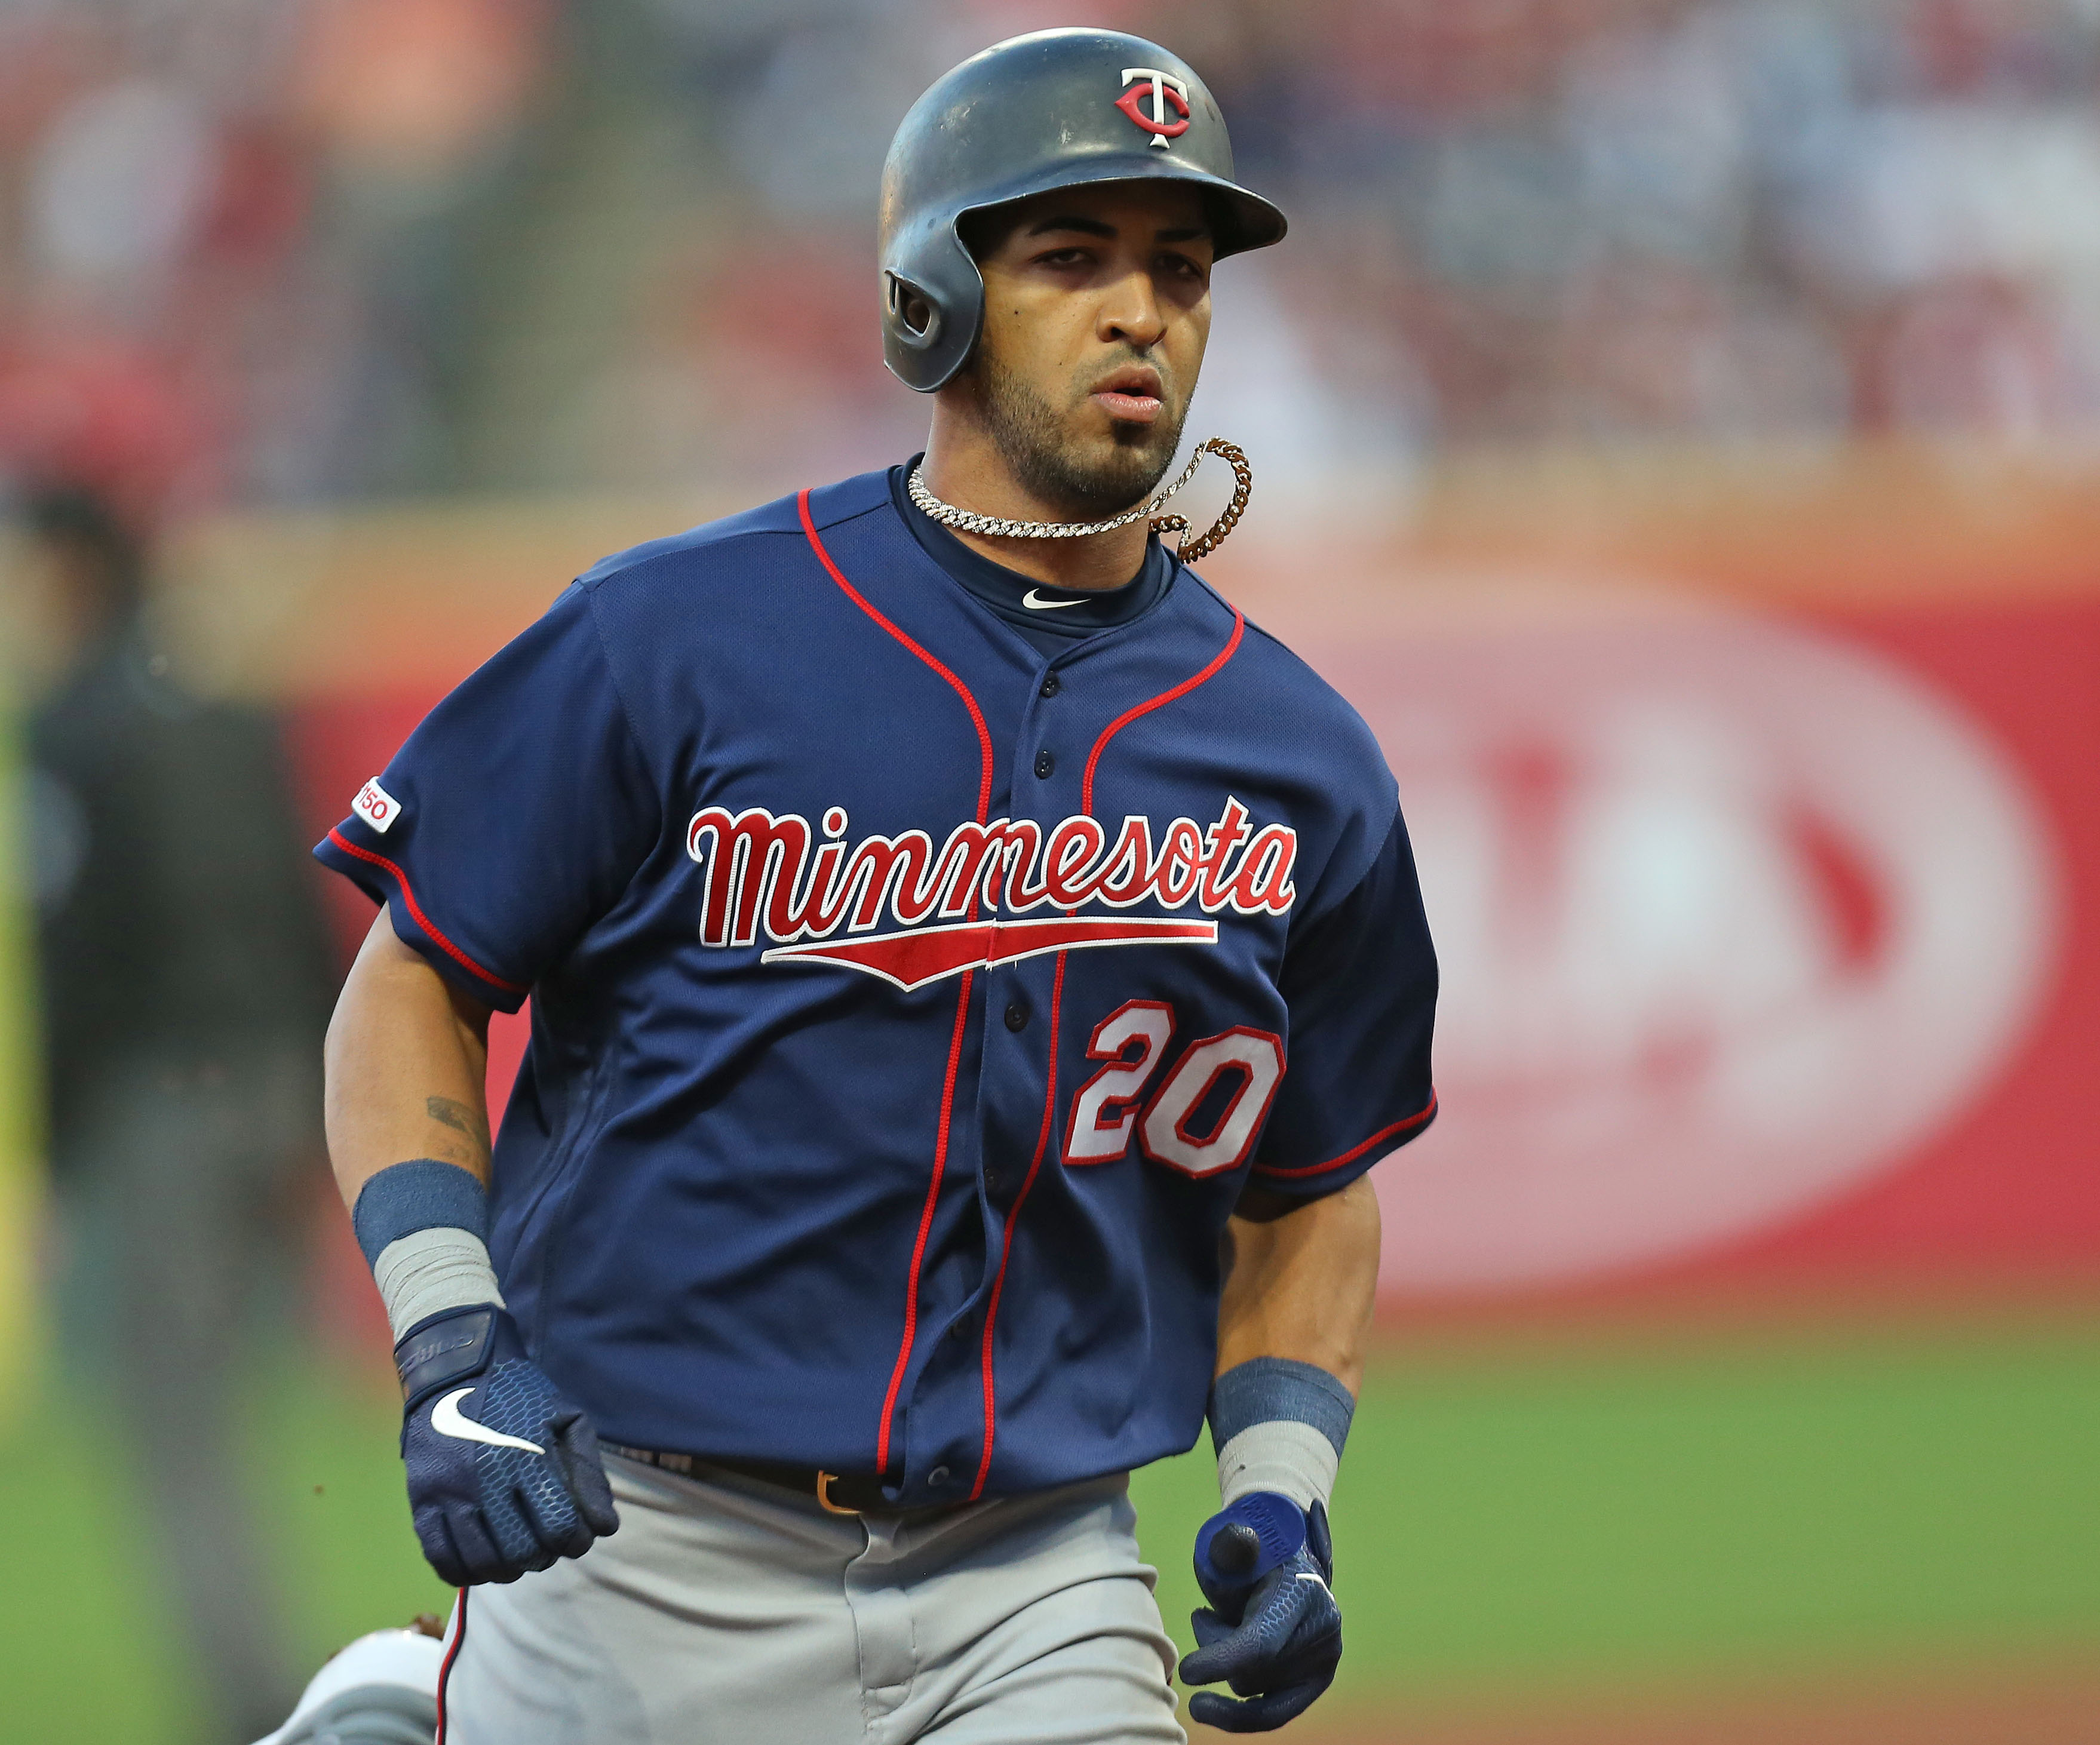 Amed Rosario: is he related to Eddie Rosario? - Breaking News in USA Today